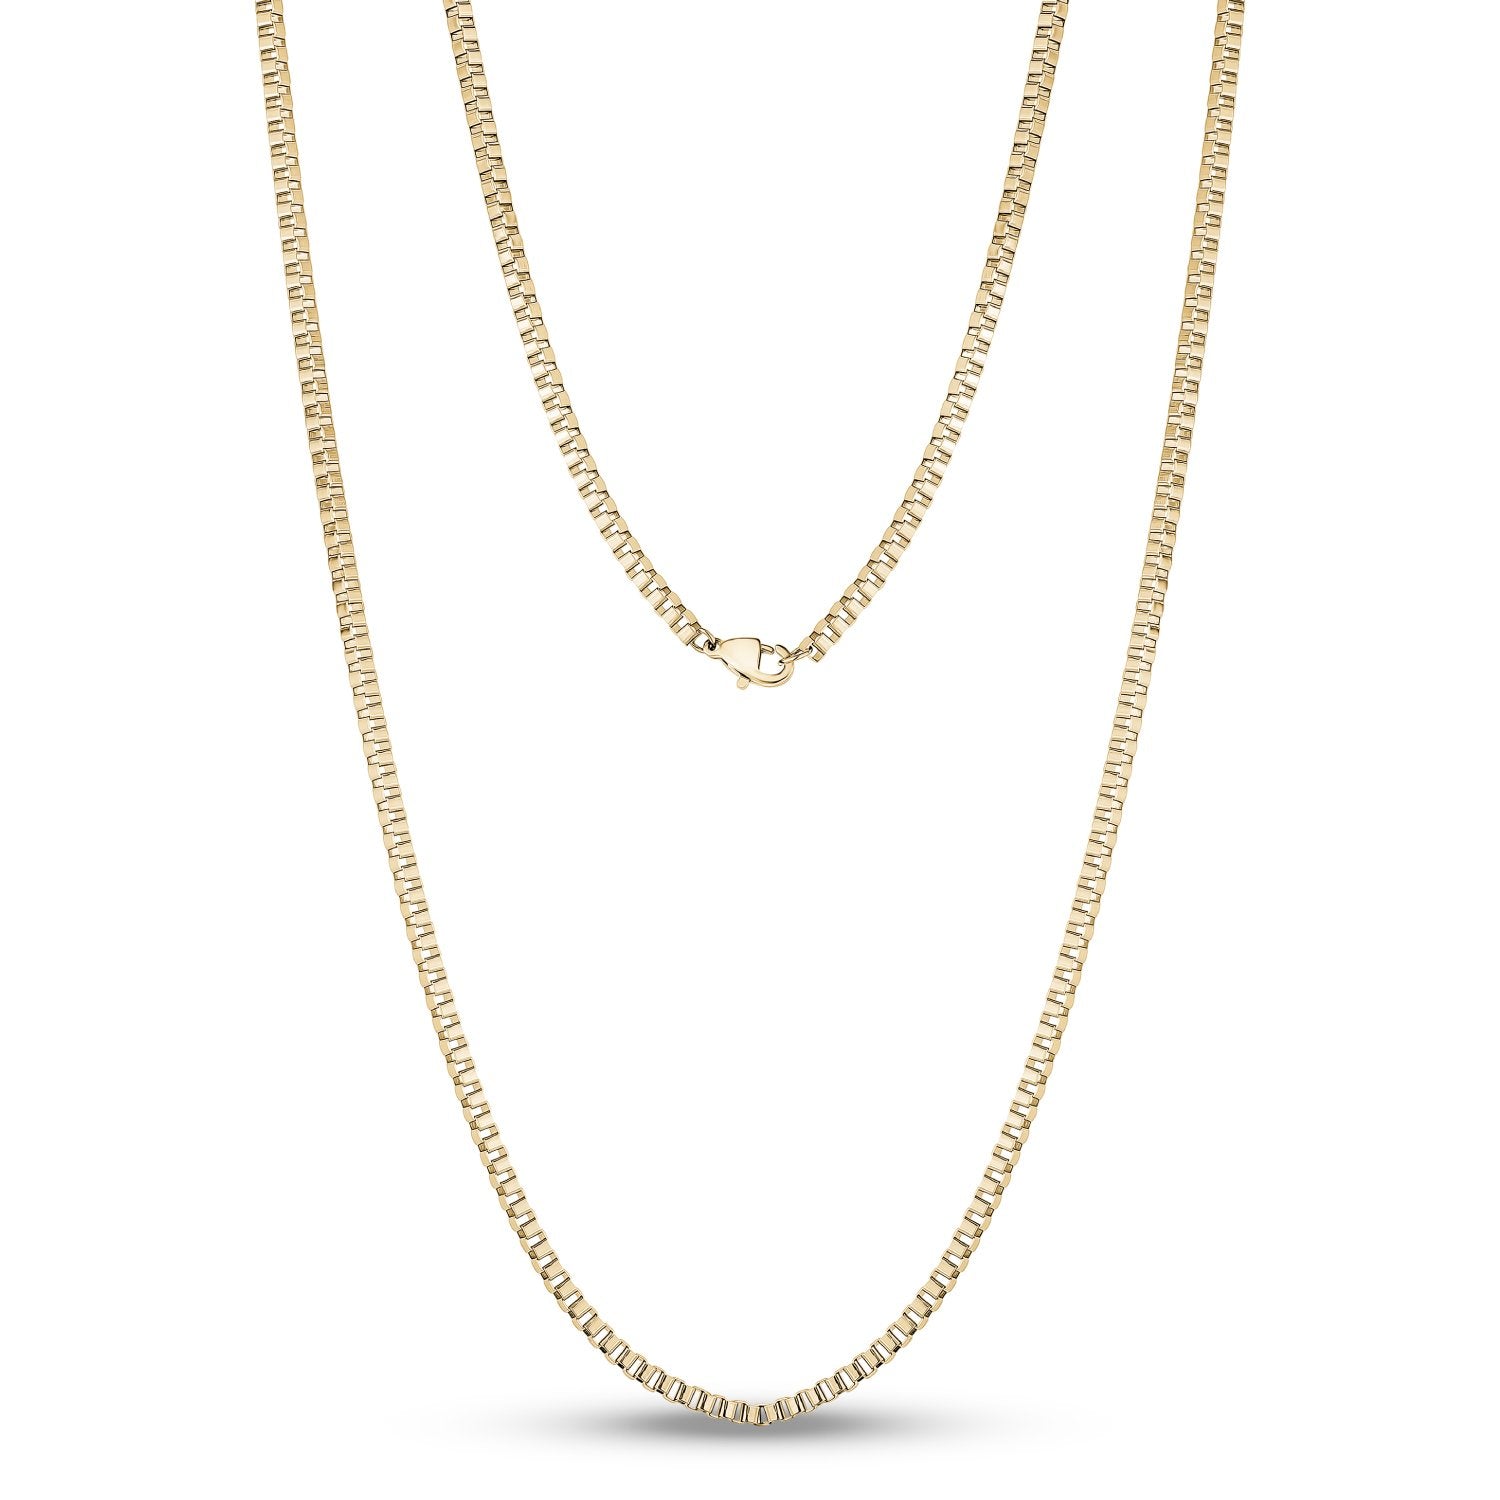 John Hardy Classic Chain 2.5mm Necklace - Free Shipping